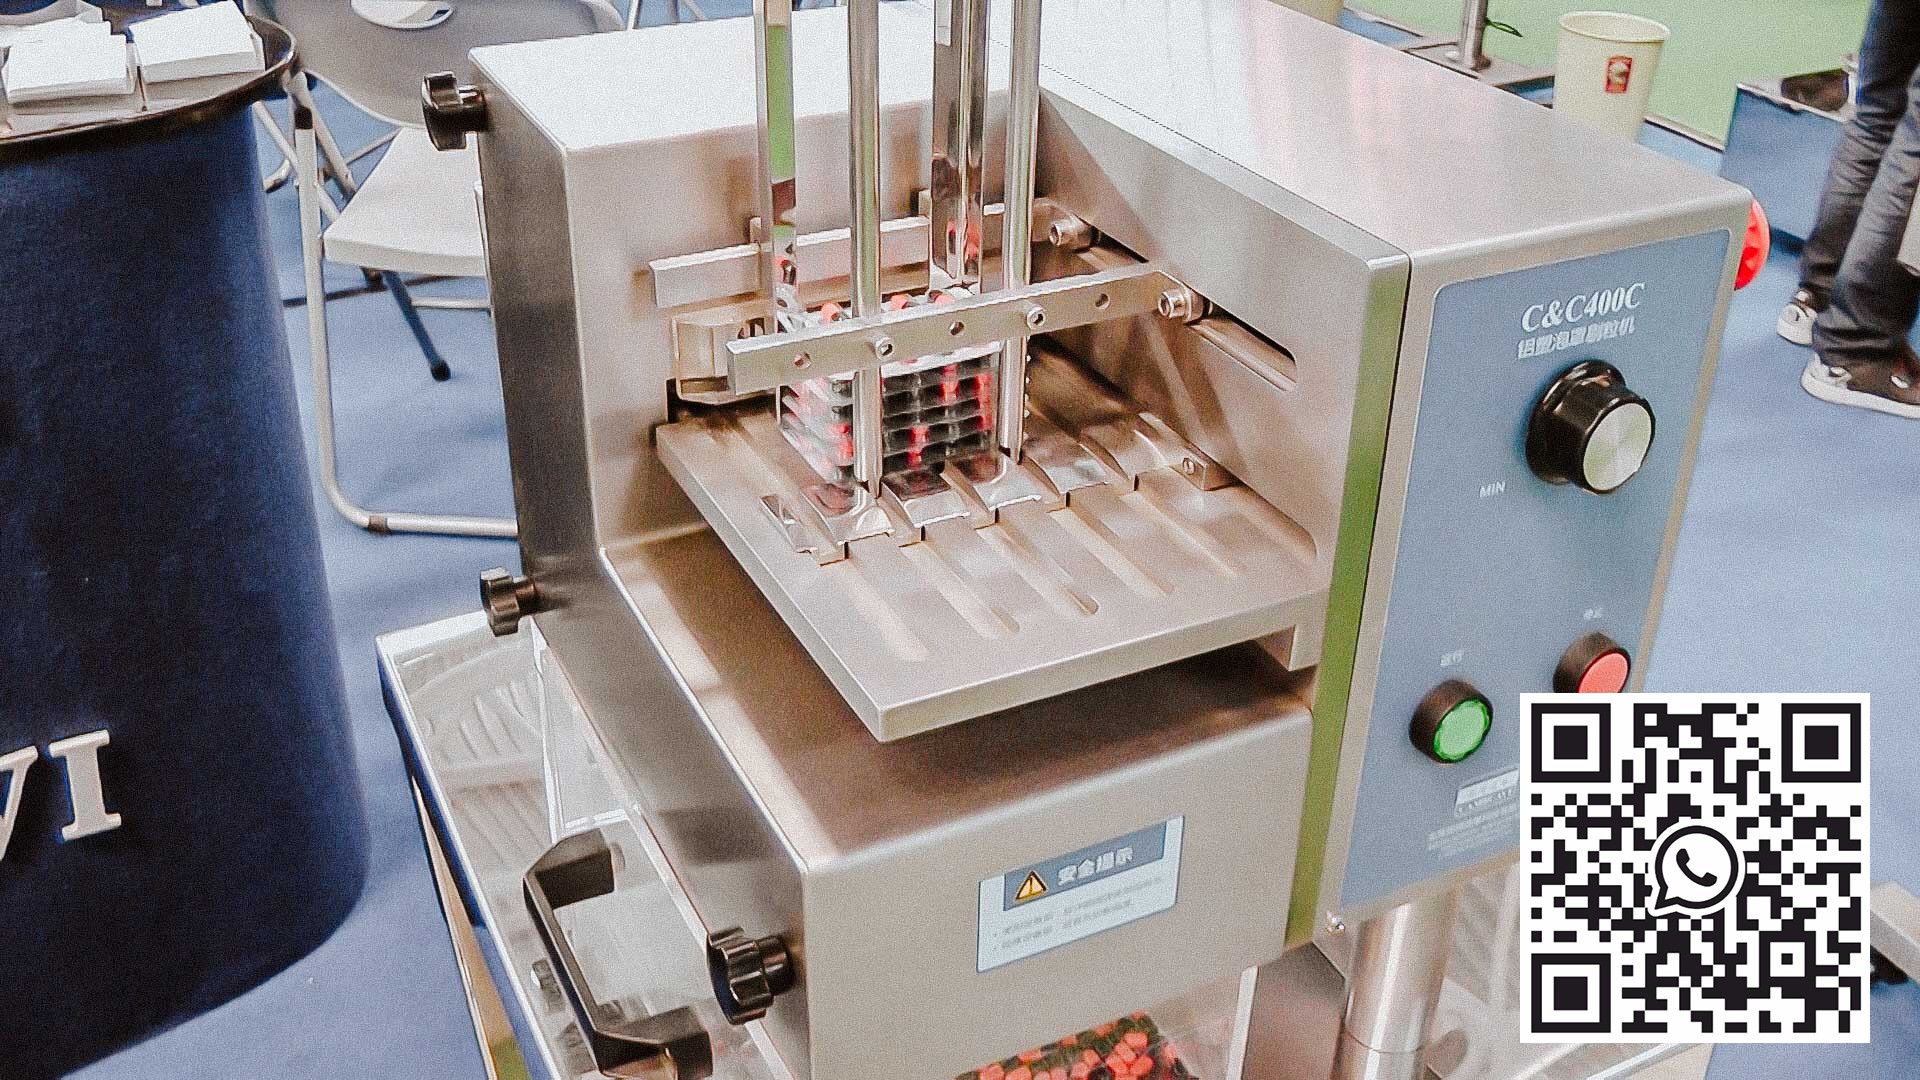 Automatic equipment for removing and cleaning gelatin capsules from the blister